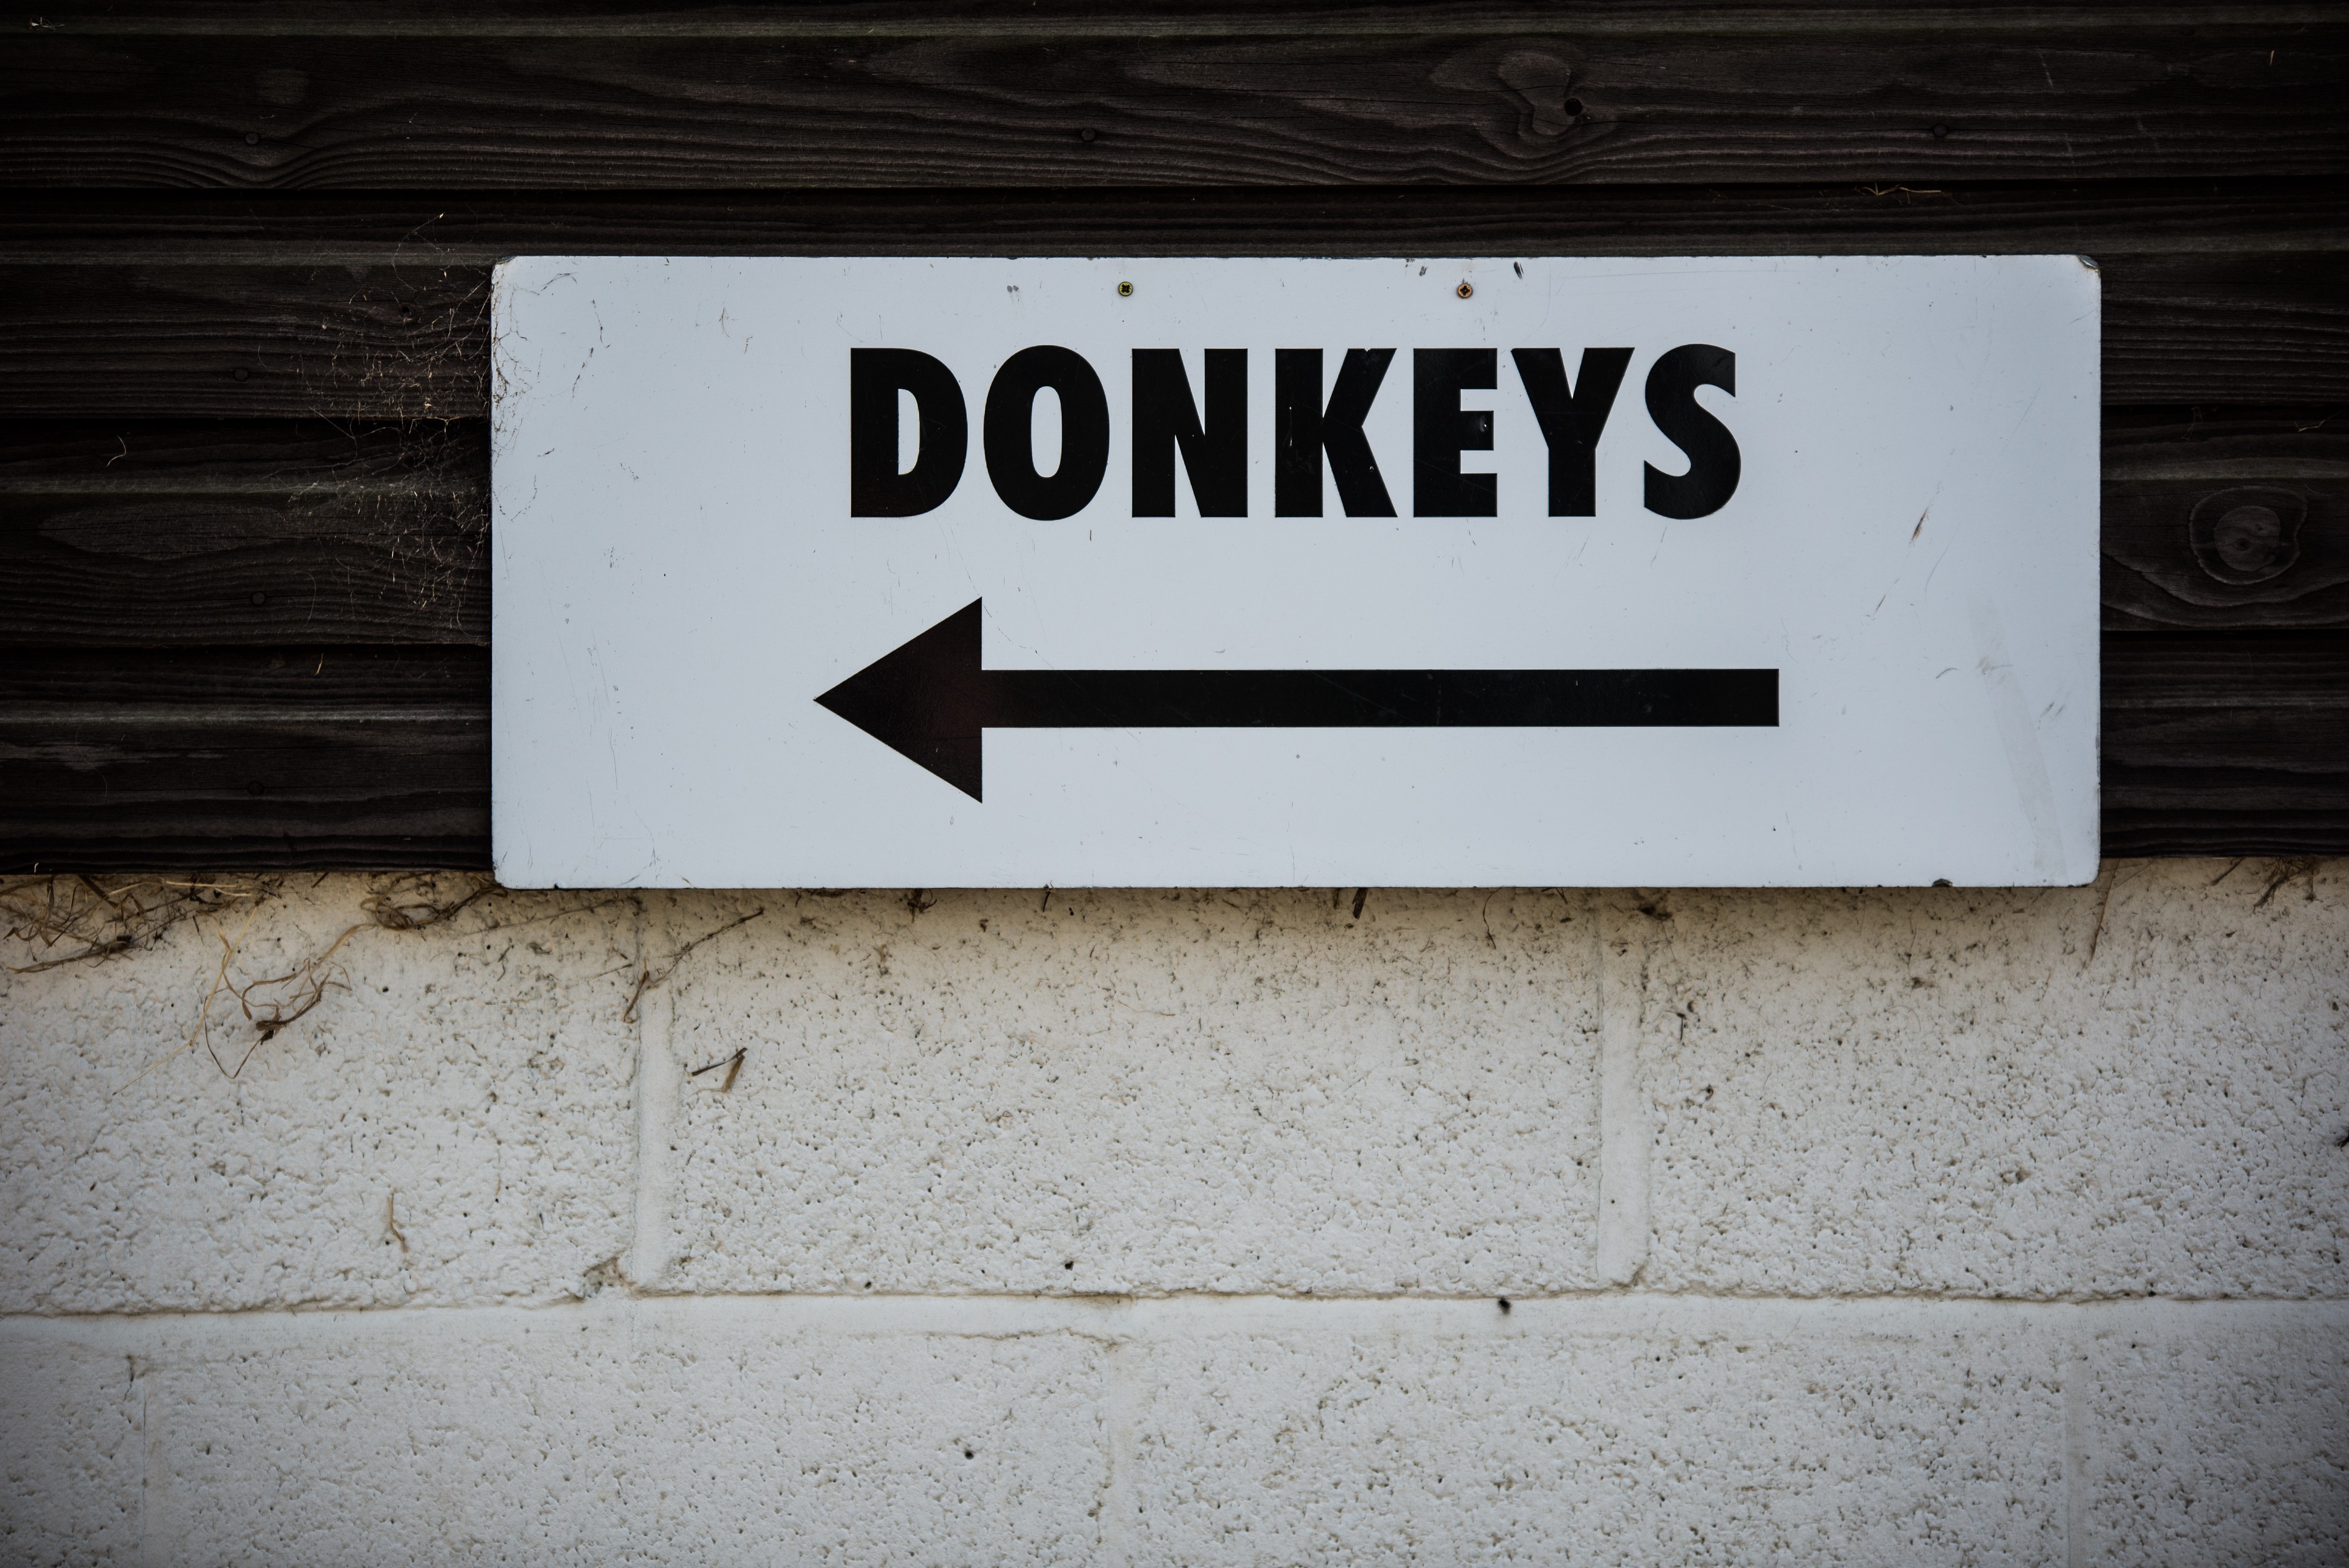 Sign with the word "DONKEYS" printed on it and an arrow pointing to the left.